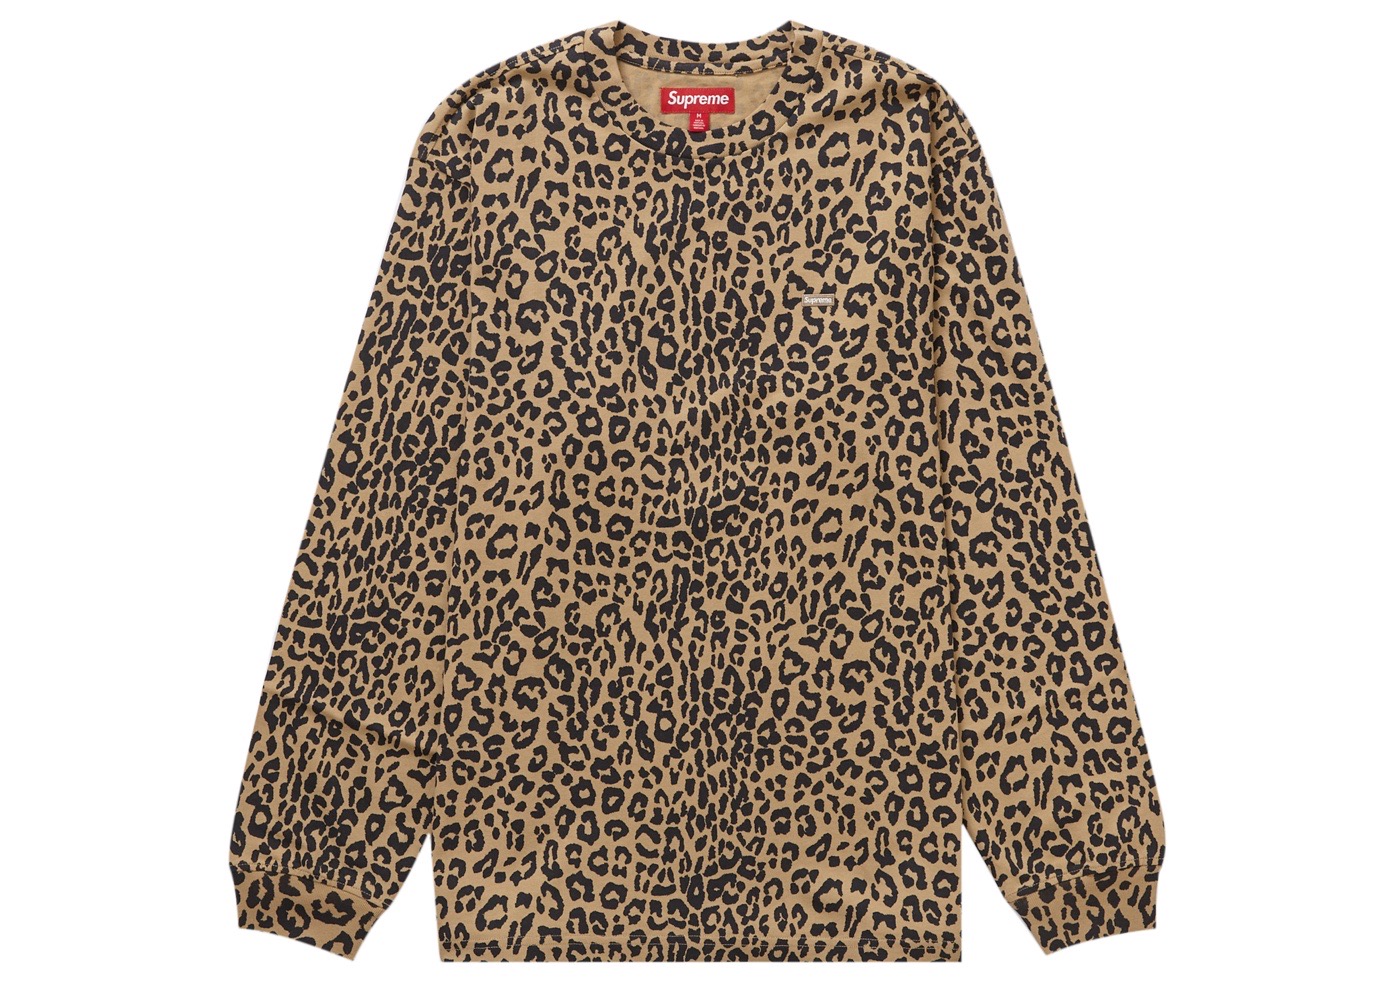 Small Box L/S Tee leopard M size ロンTSmallBoxlogotee - トップス